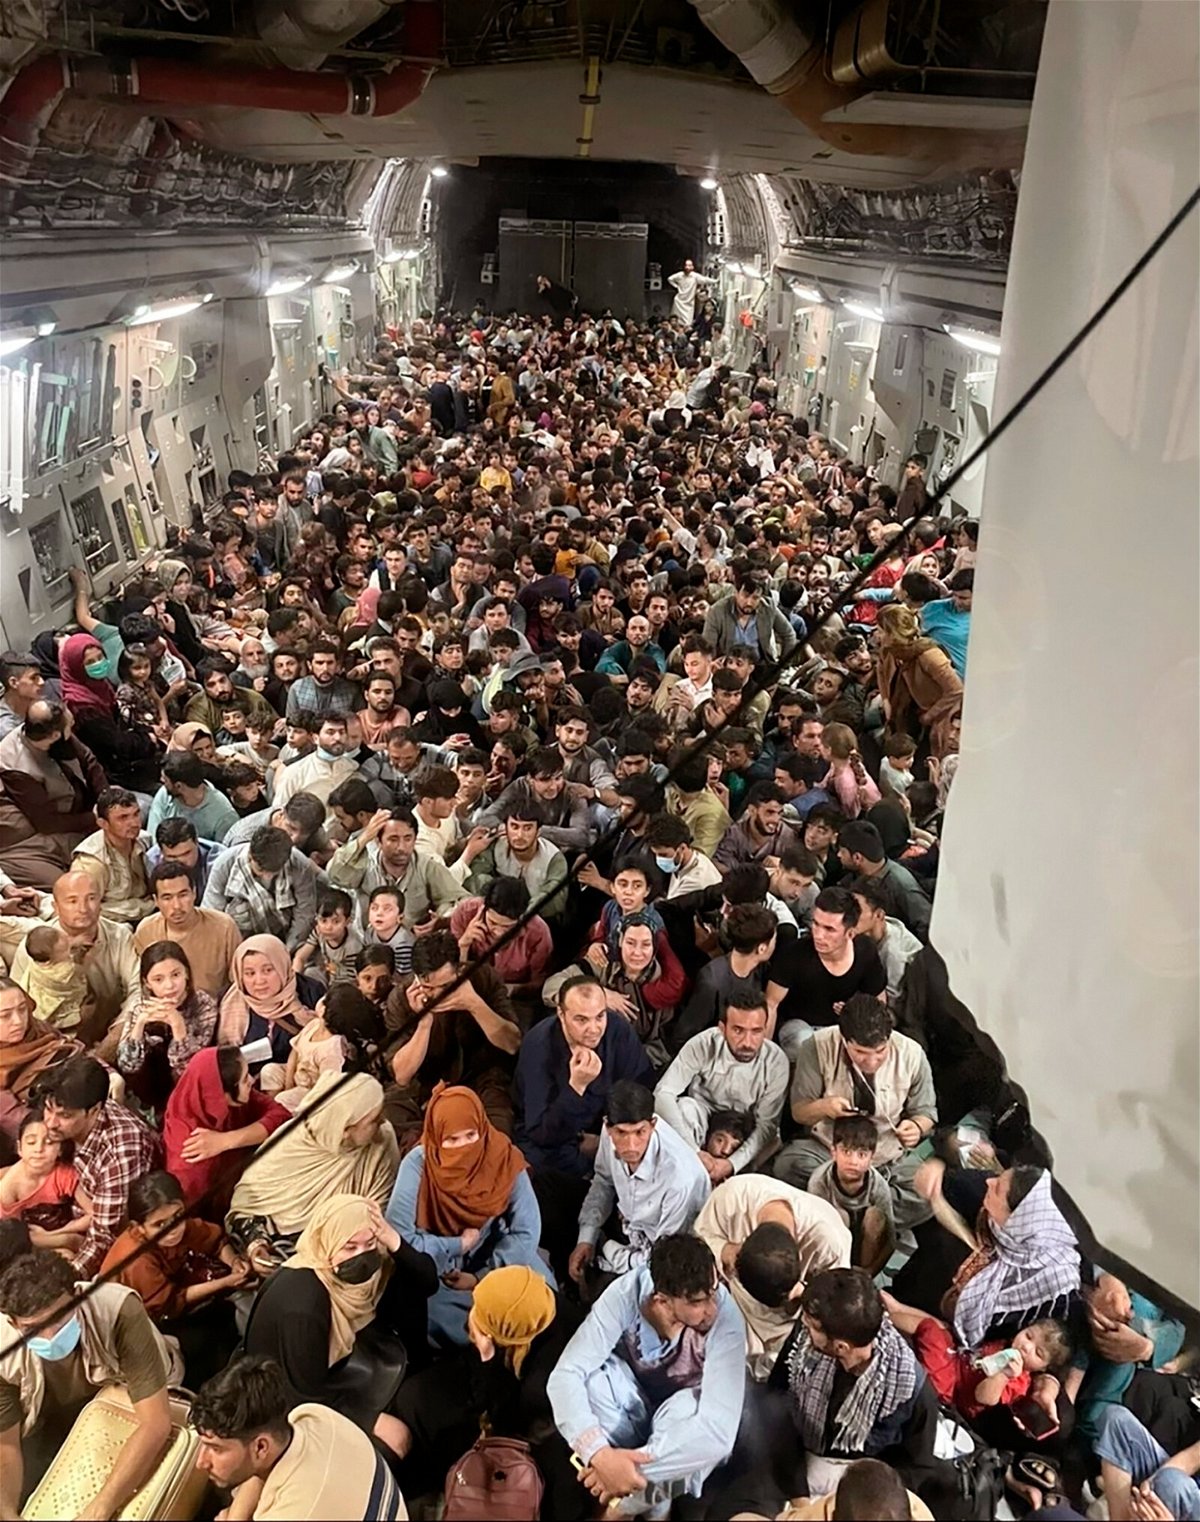 <i>Capt. Chris Herbert/US Air Force/AP</i><br/>Afghan citizens pack inside a U.S. Air Force C-17 Globemaster III as they are transported from Hamid Karzai International Airport in Afghanistan